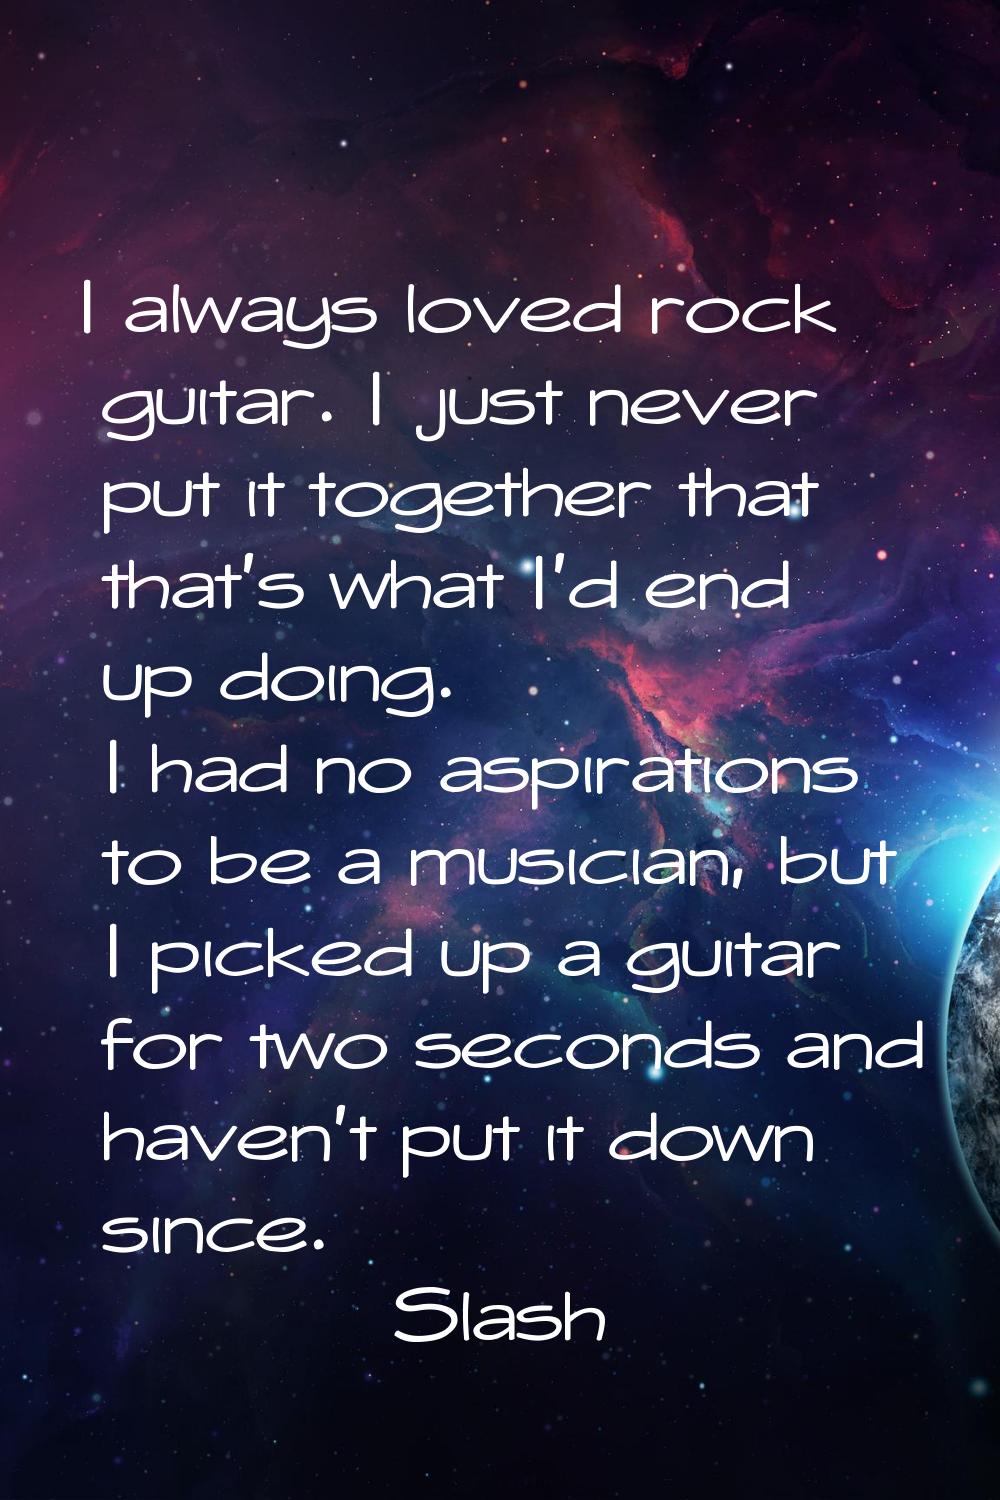 I always loved rock guitar. I just never put it together that that's what I'd end up doing. I had n